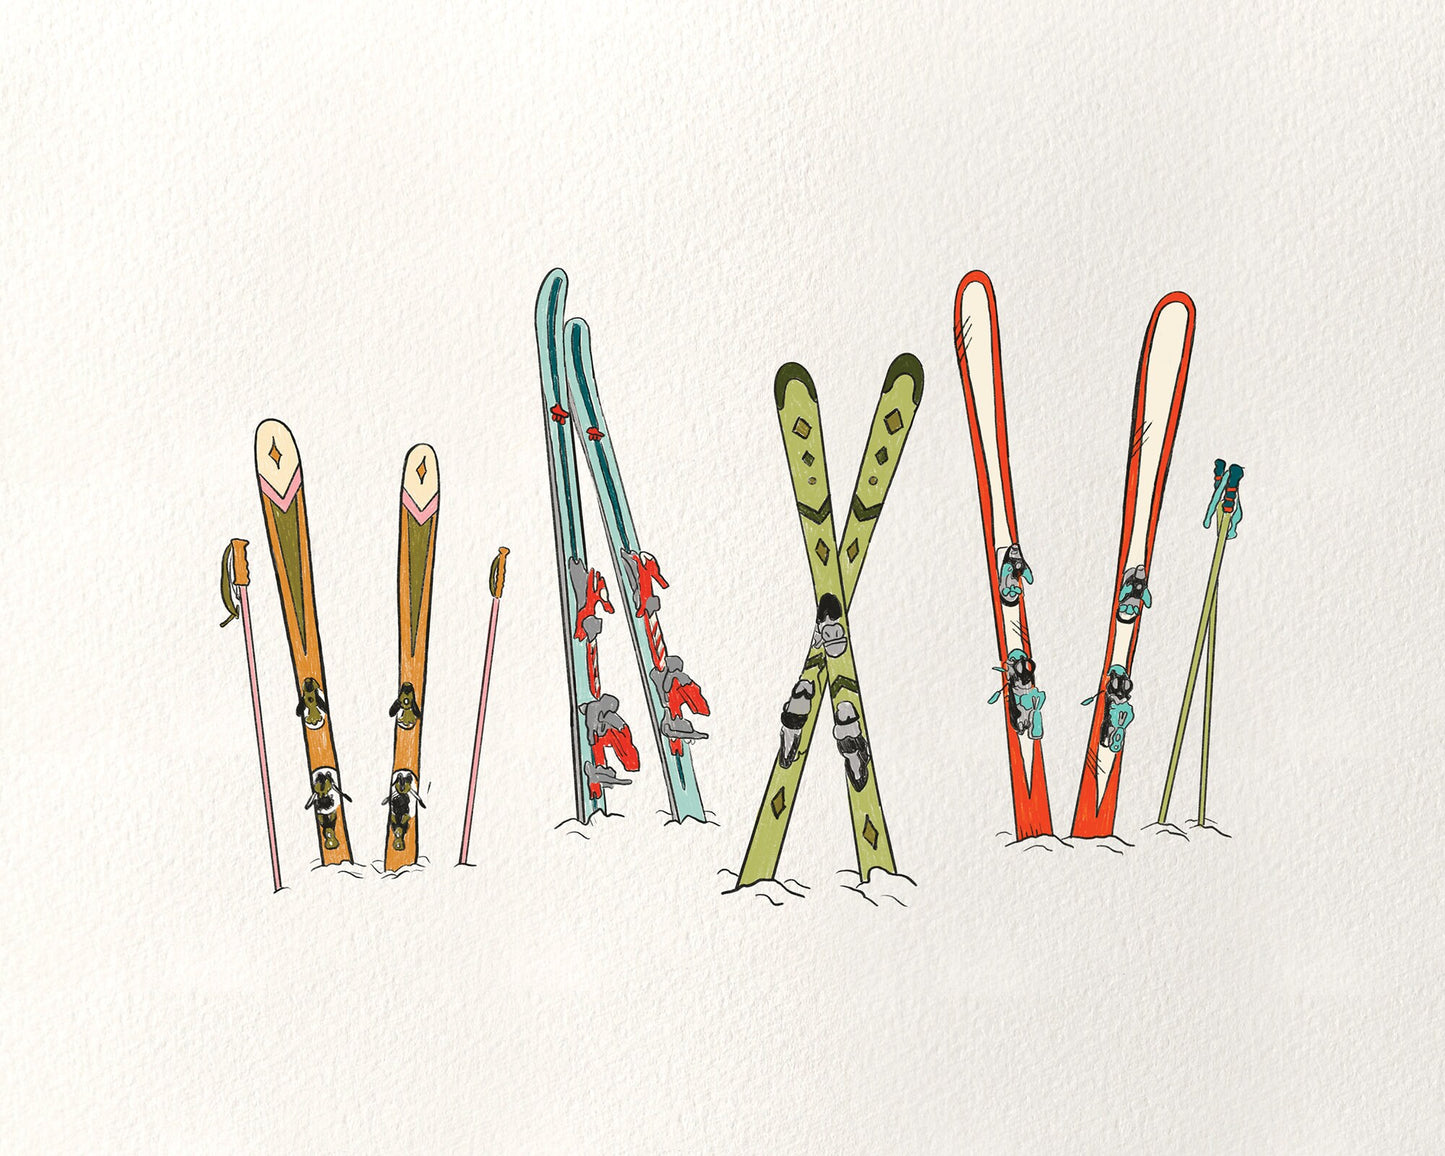 Skis in the Snow | 8x10 Print